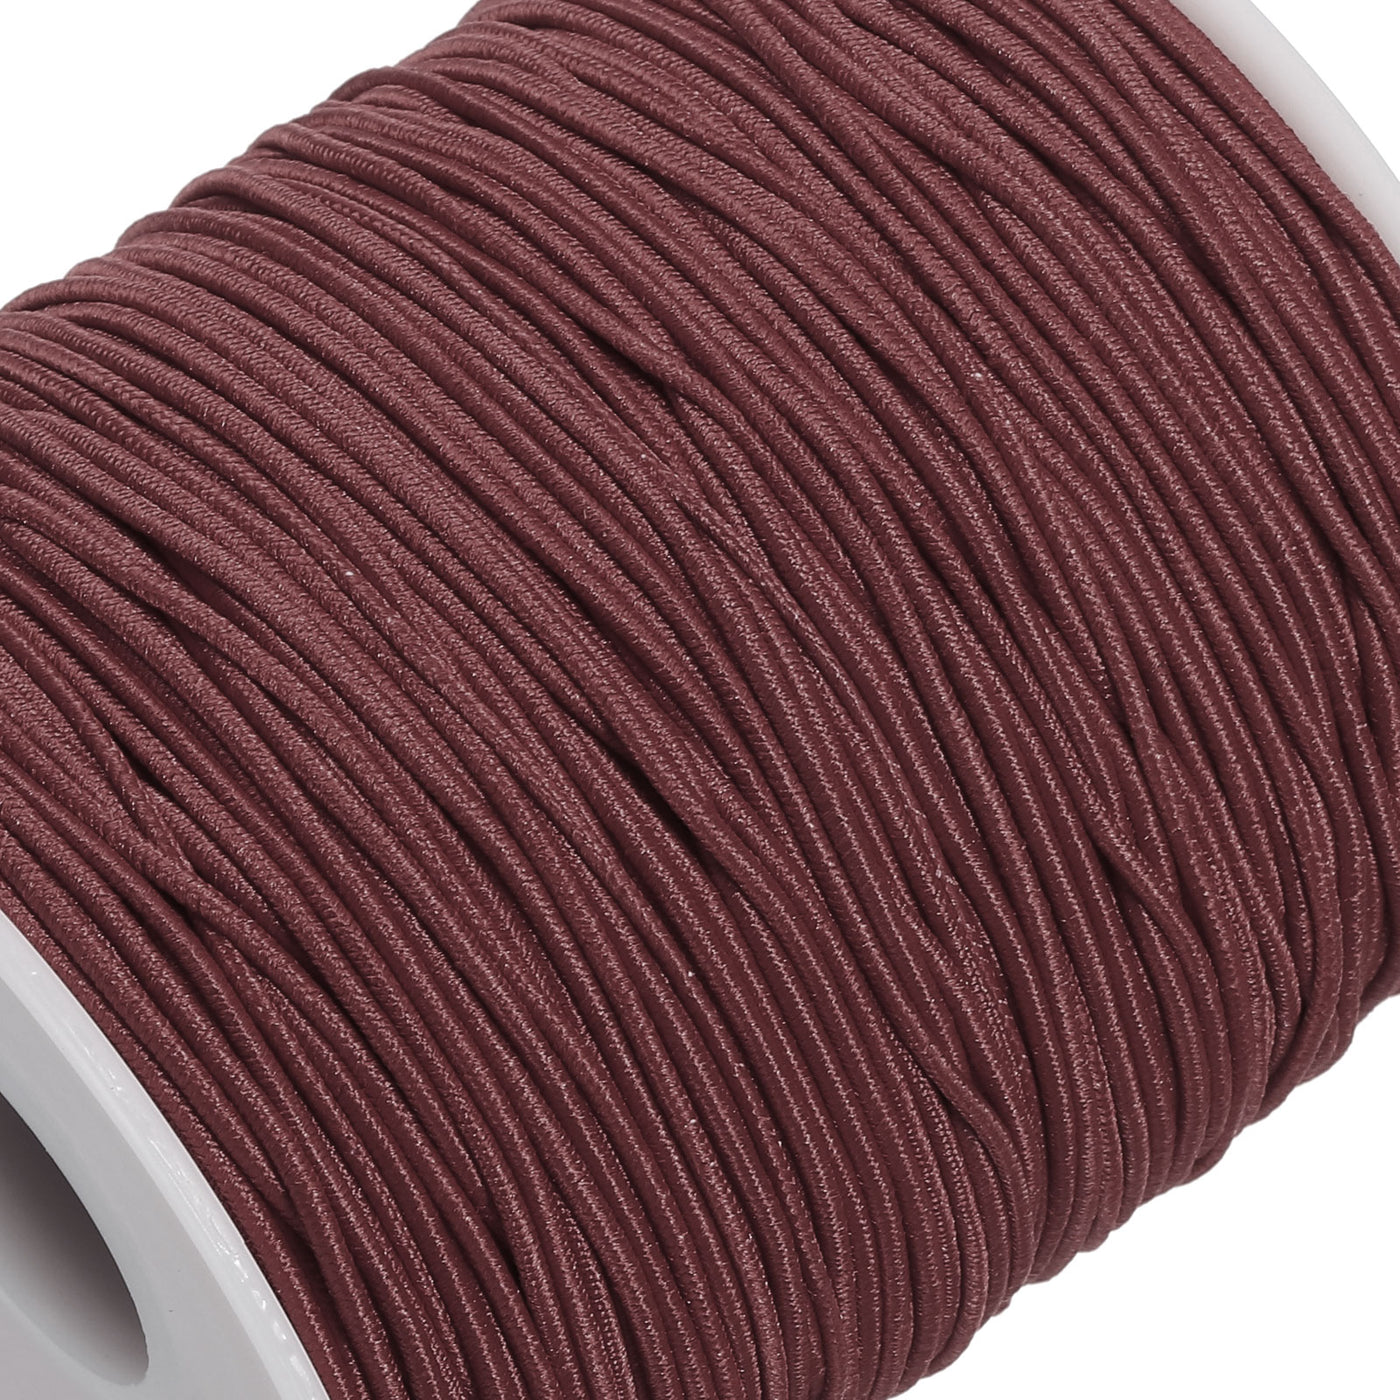 Harfington Elastic Cord Stretchy String 1.2mm 109 Yards Dark Brown for Crafts, Jewelry Making, Bracelets, Necklaces, Beading